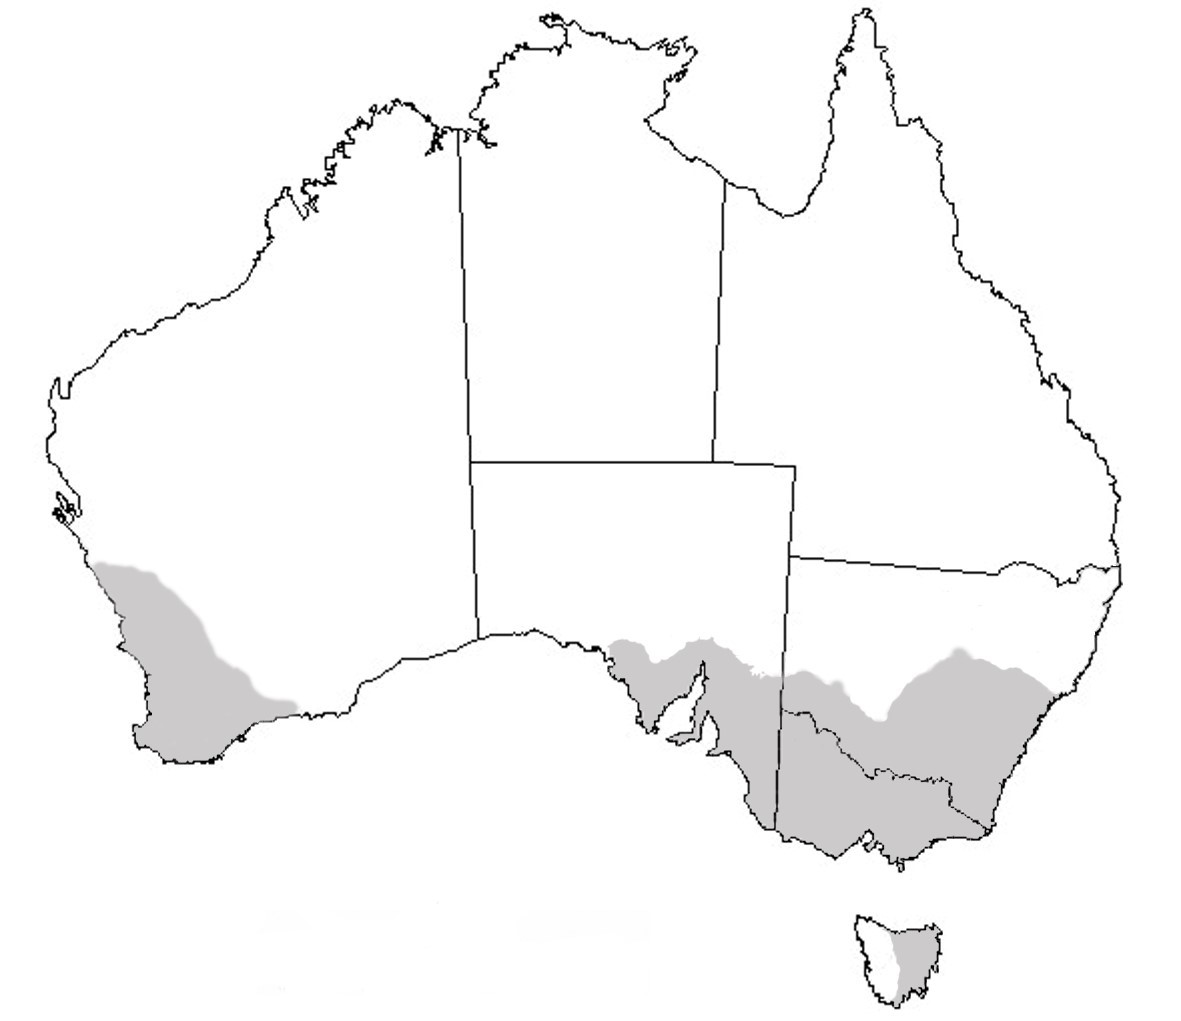 Drawing of Australia with grey shaded areas showing the known distribution of redlegged earth mites.